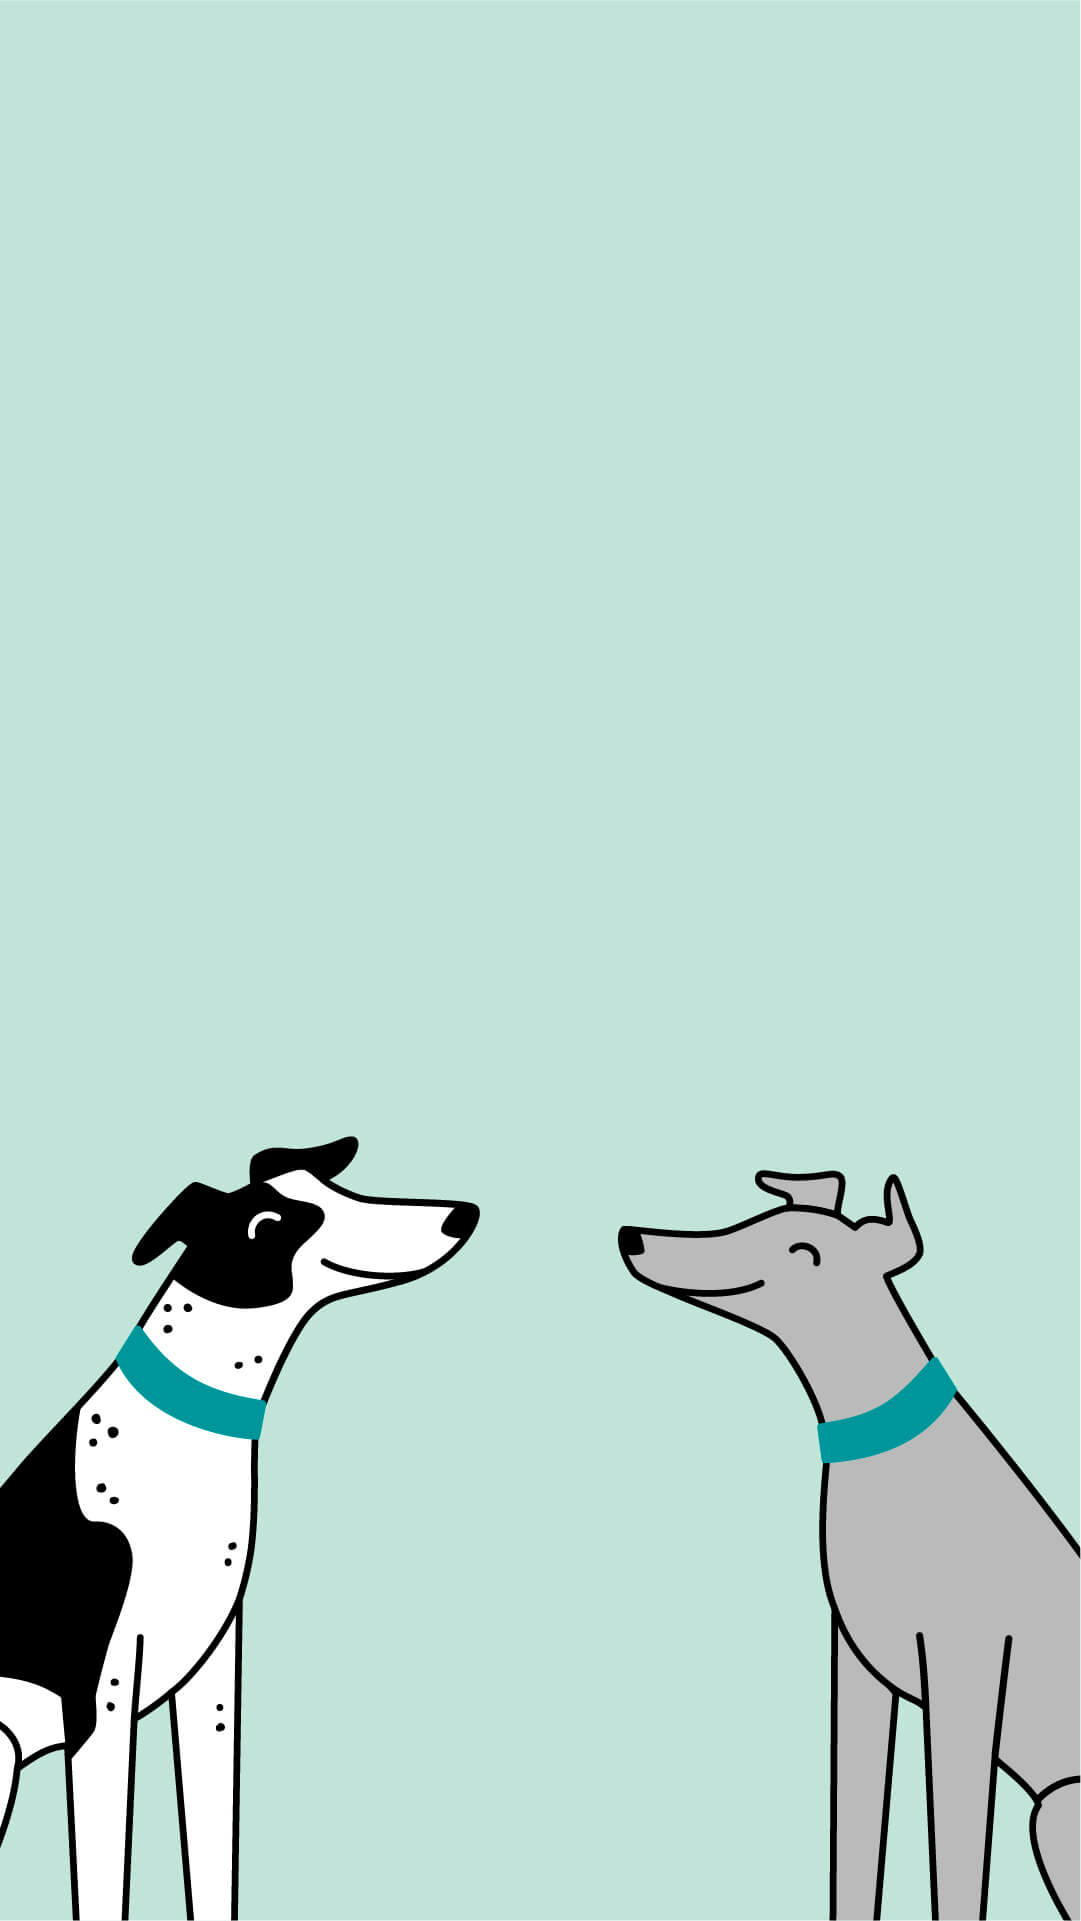 A light blue rectangle with two greyhounds peeking in at the bottom